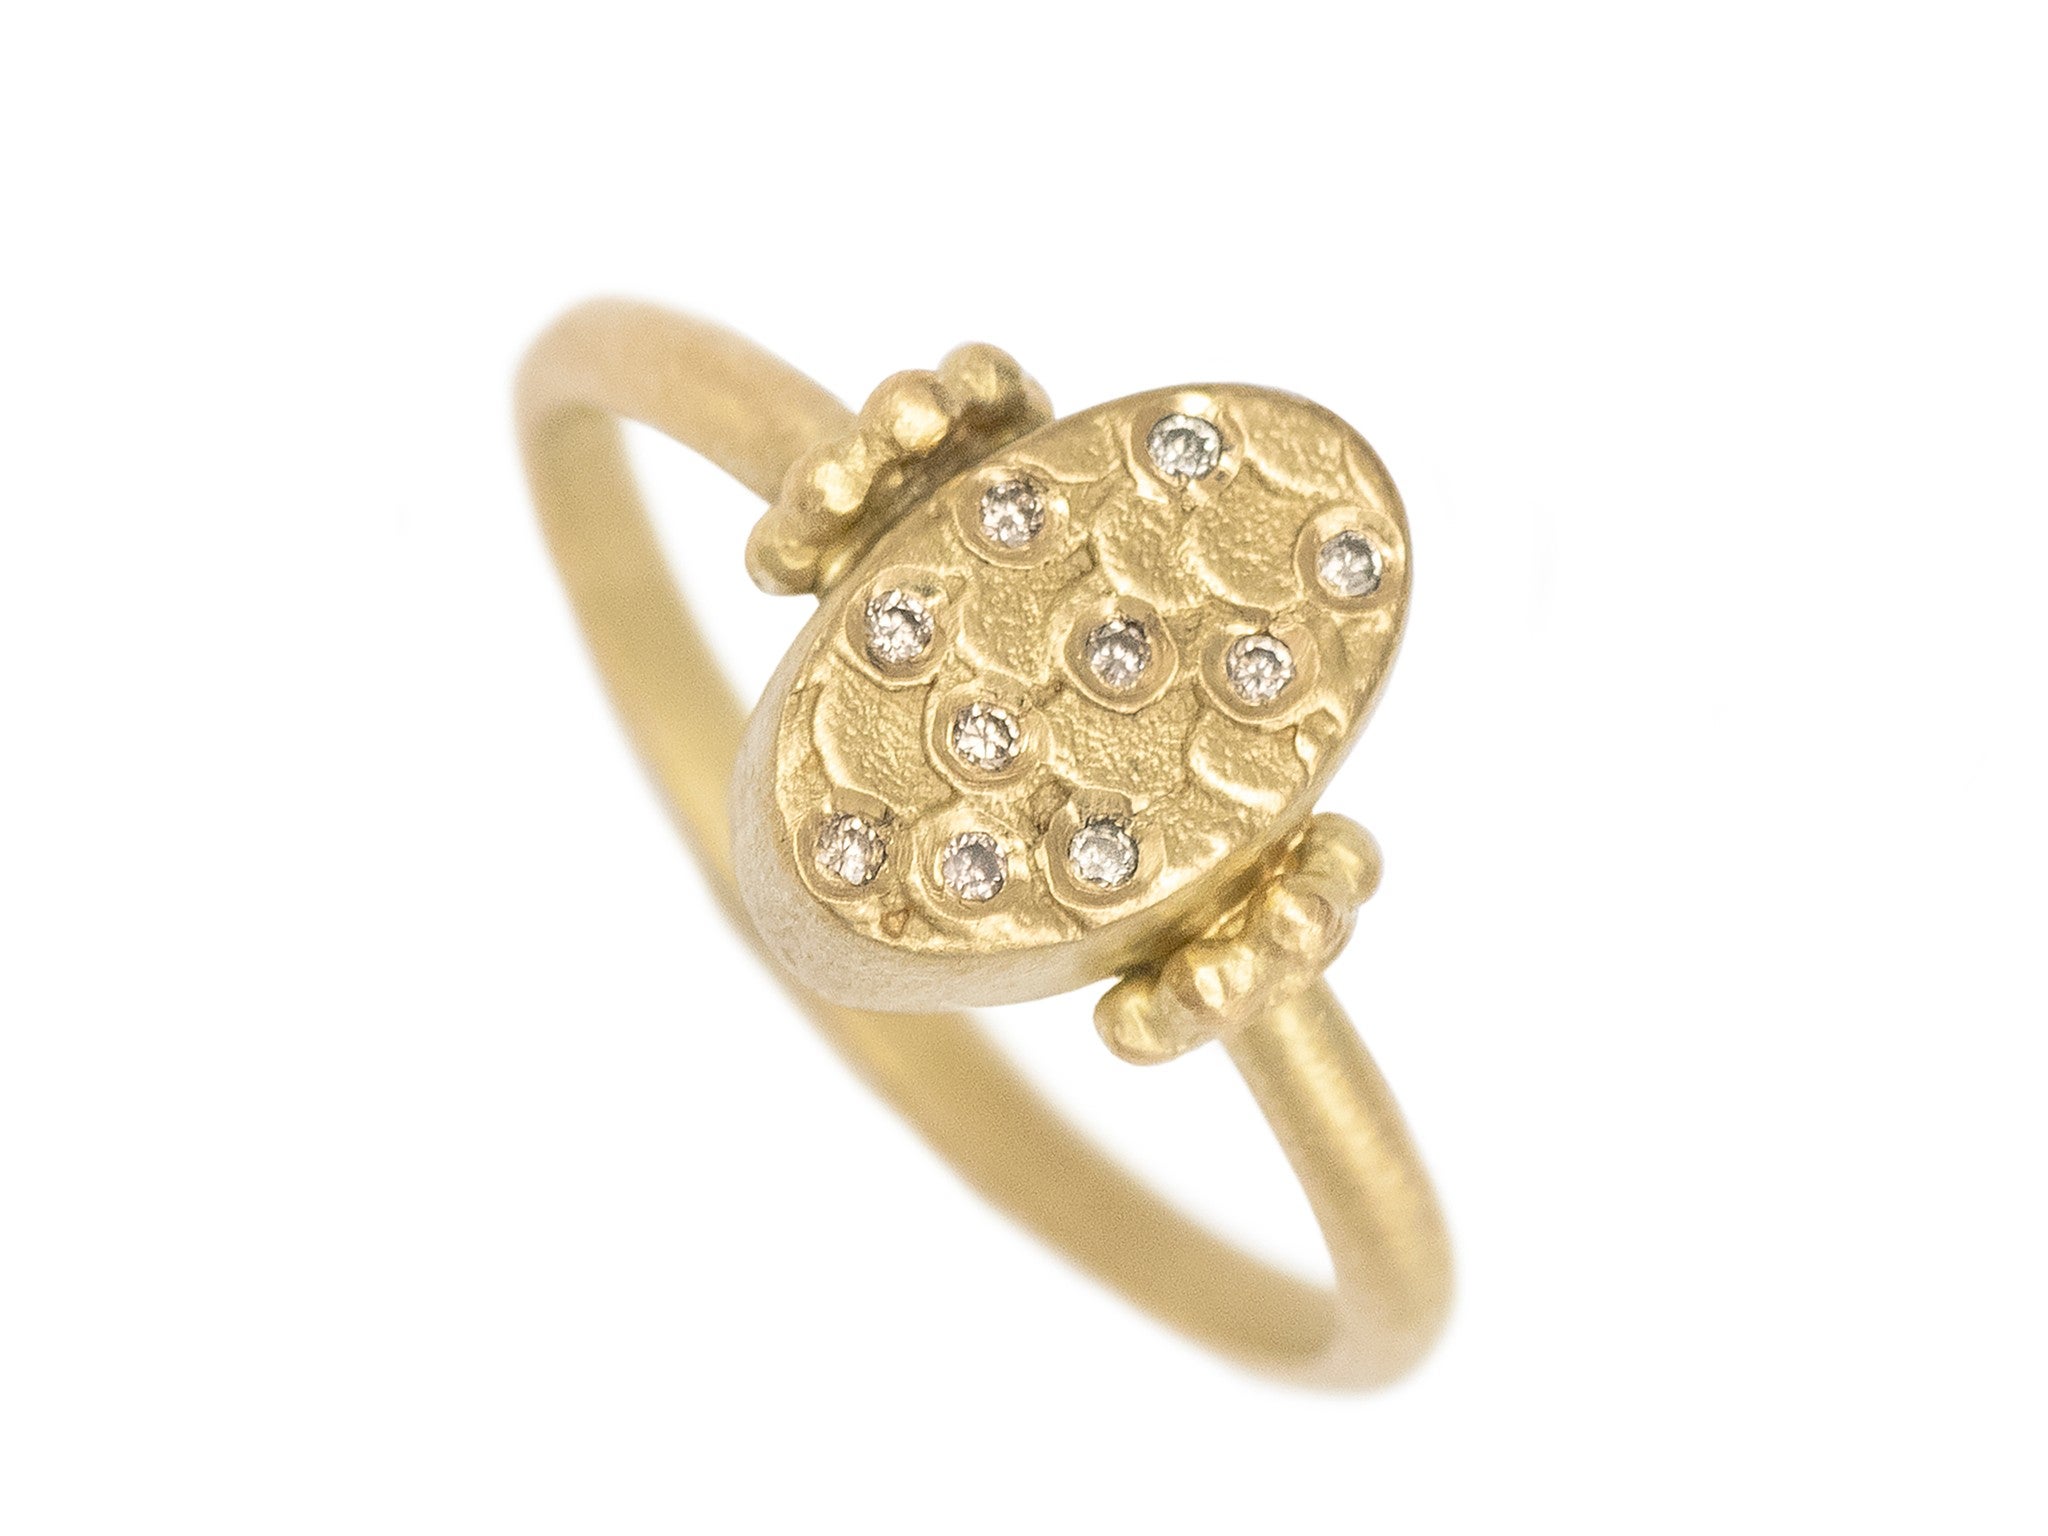 Alison Macleod gold and diamond oval catkin ring indybest.jpg